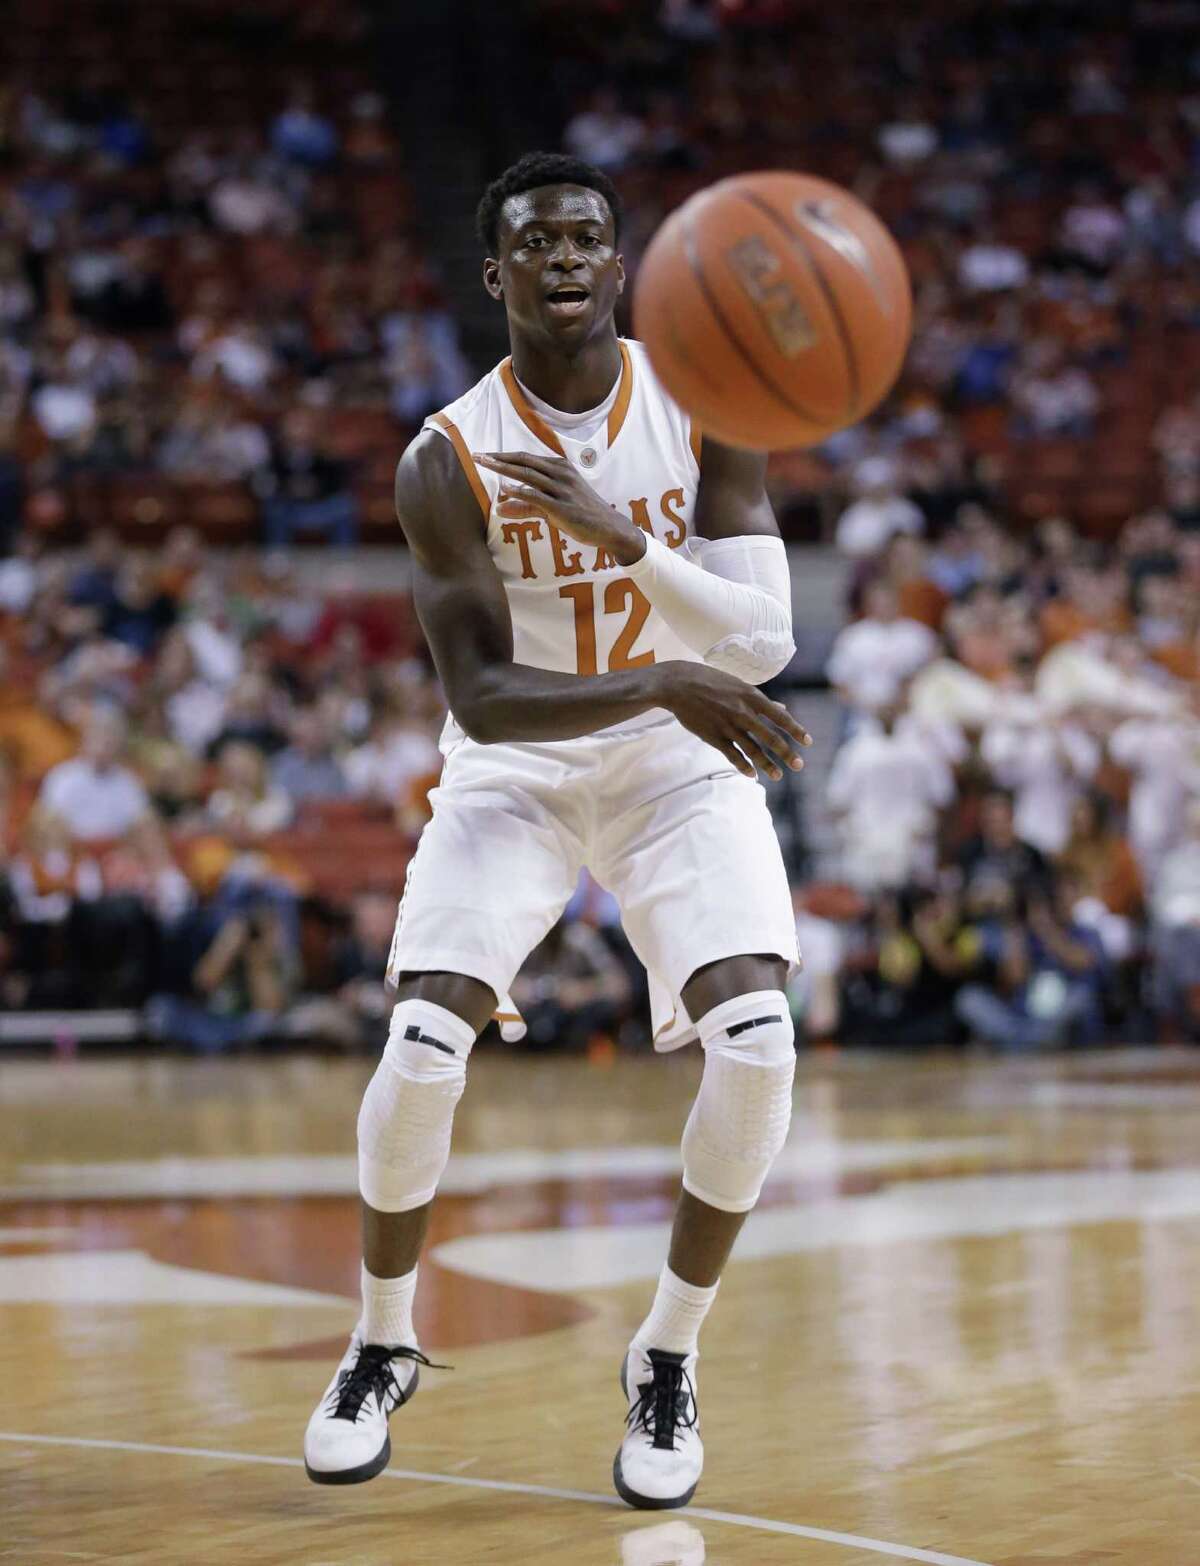 Myck Kabongo's 45 games at Texas didn't live up to expectations, but there is precedent for UT players' improving their stature in the NBA.